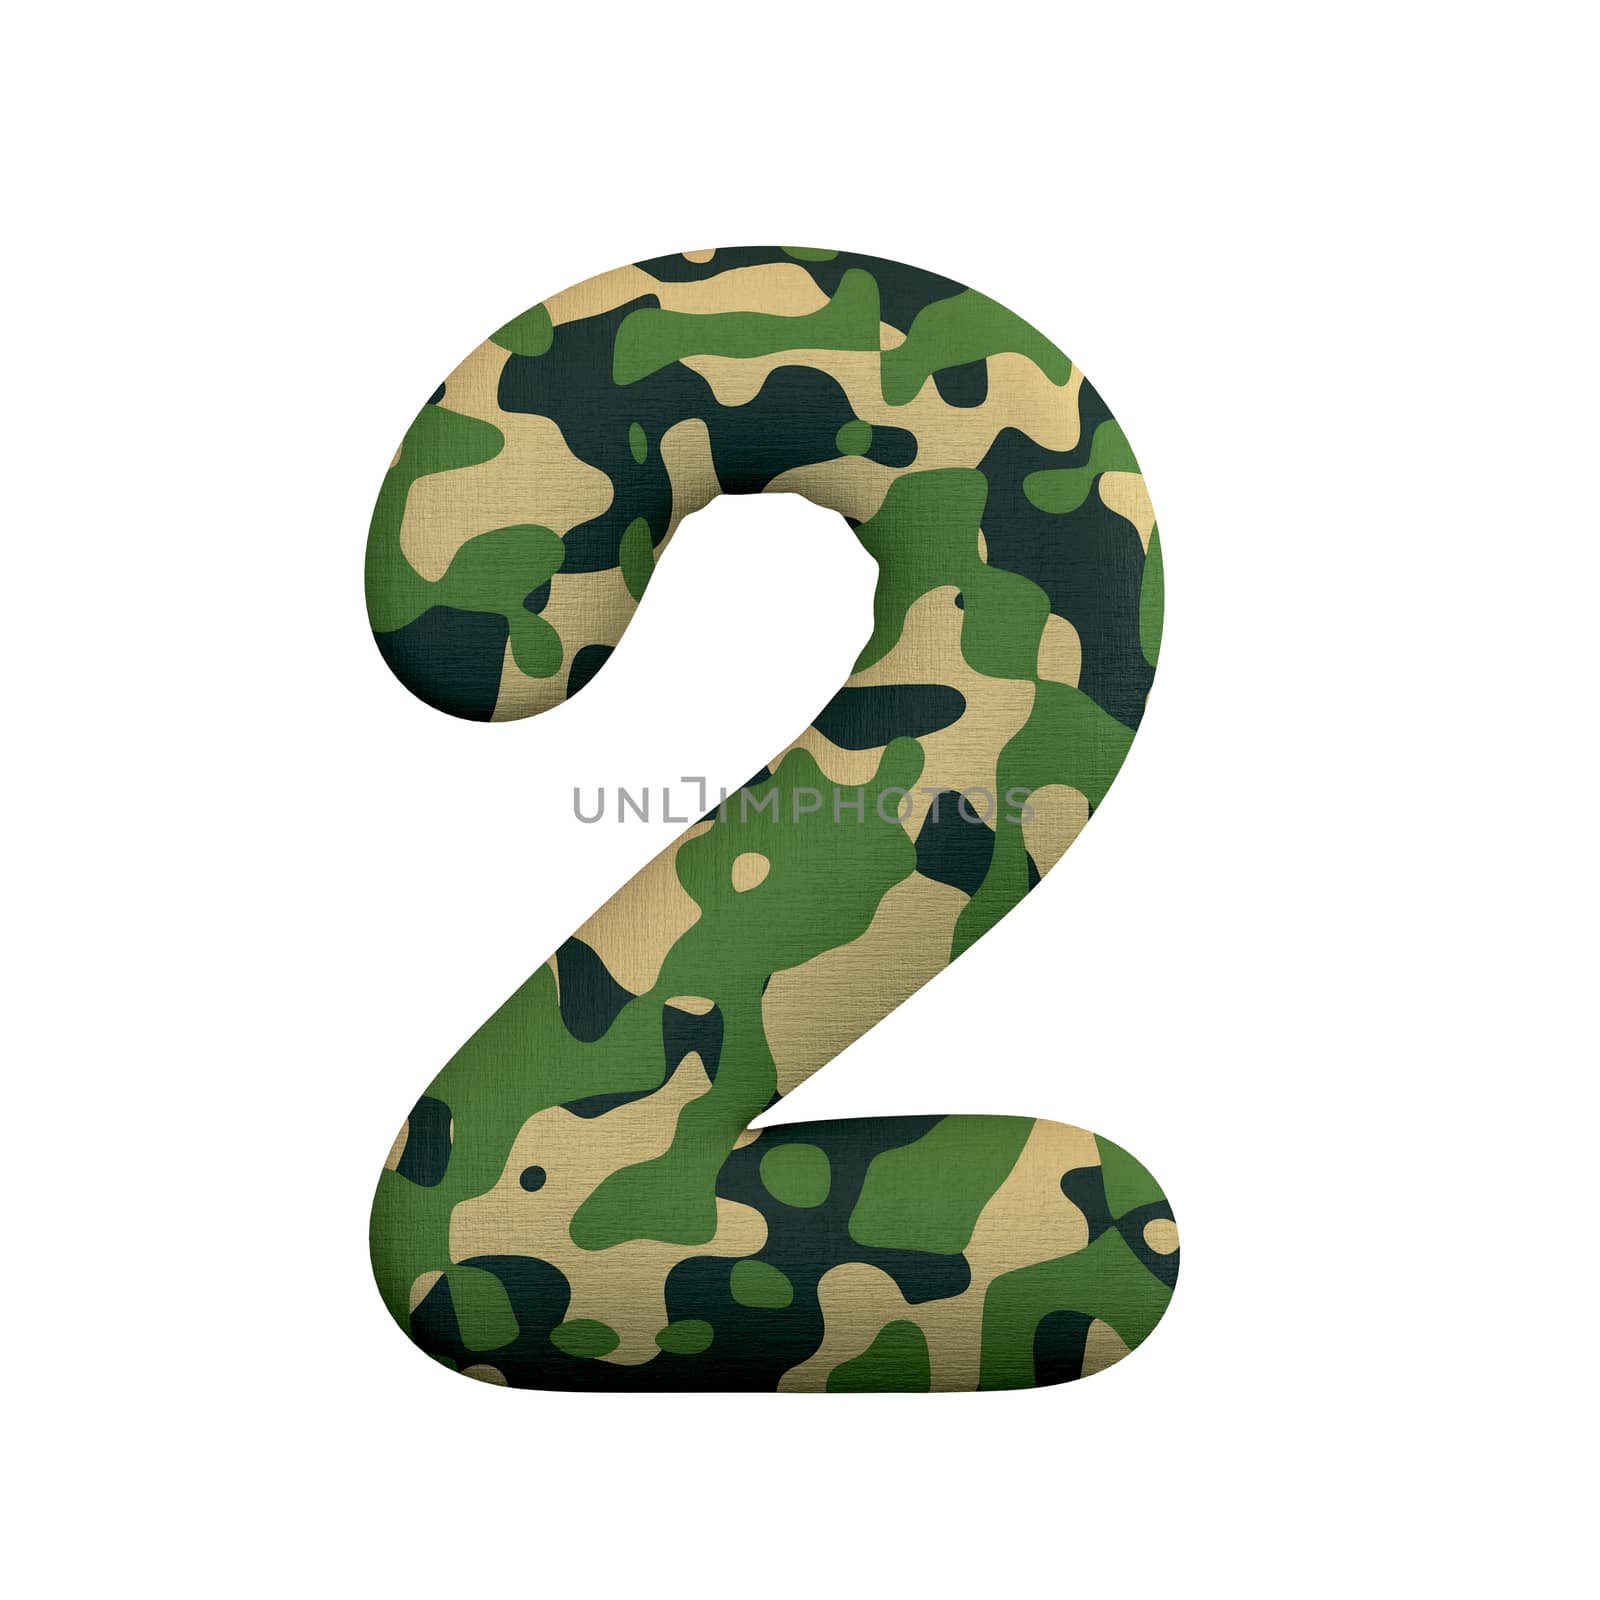 Army number 2 - 3d Camo digit isolated on white background. This alphabet is perfect for creative illustrations related but not limited to Army, war, survivalism...